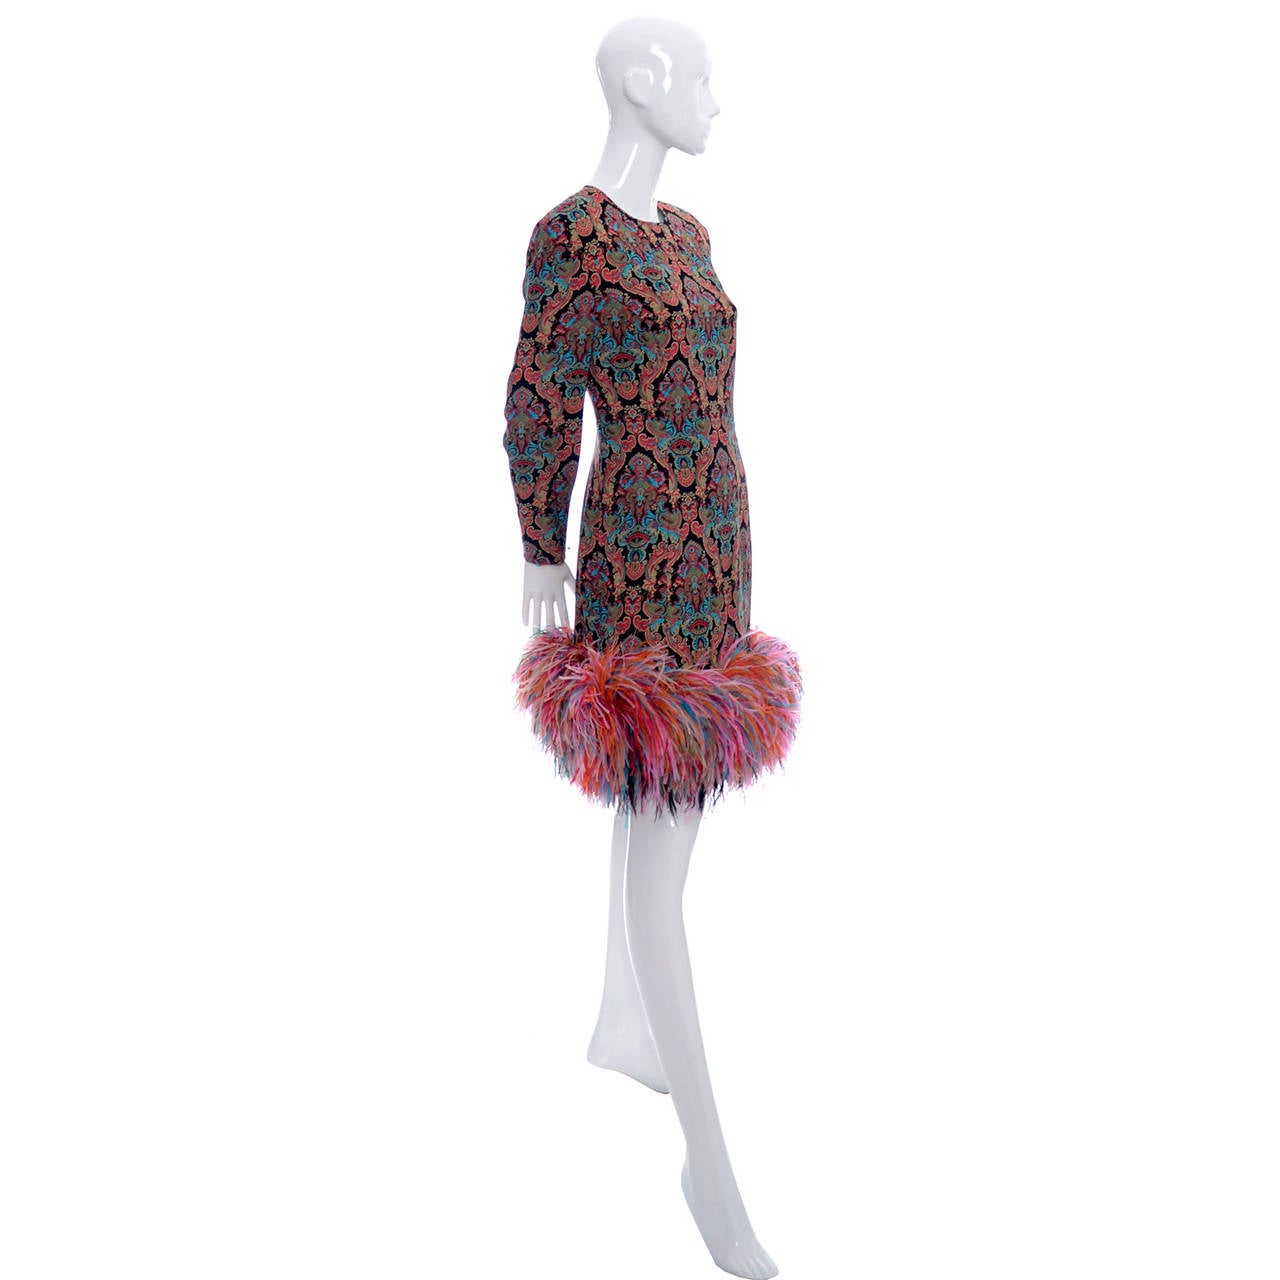 This James Galanos 1980s vintage cocktail party dress has sensational bright, multi colored ostrich feathers around the hem.  The dress is in excellent  condition with 3 ½” zippers on the sleeves and almost a foot of feathers at the hem. Fabric